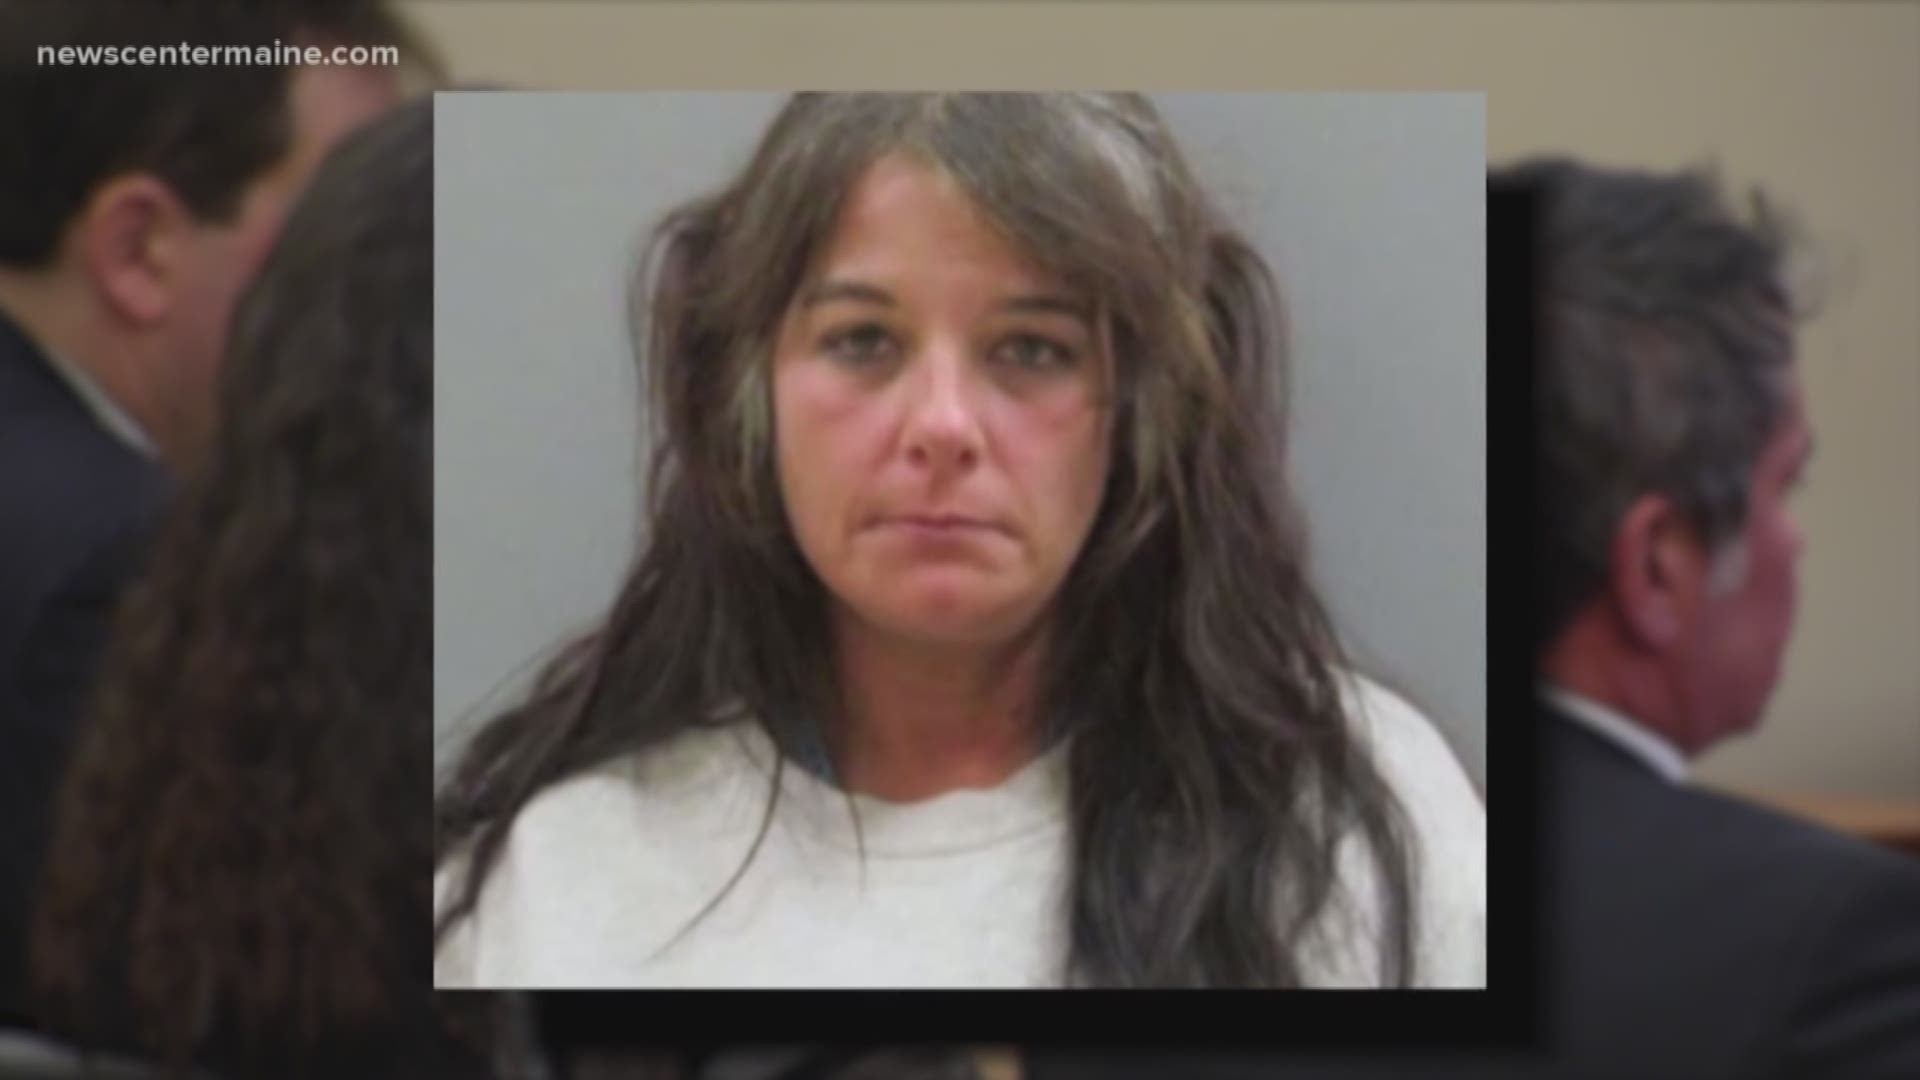 A judge ruled on Tuesday that Shawna Gatto is guilty of the death of 4-year-old Kendall Chick.